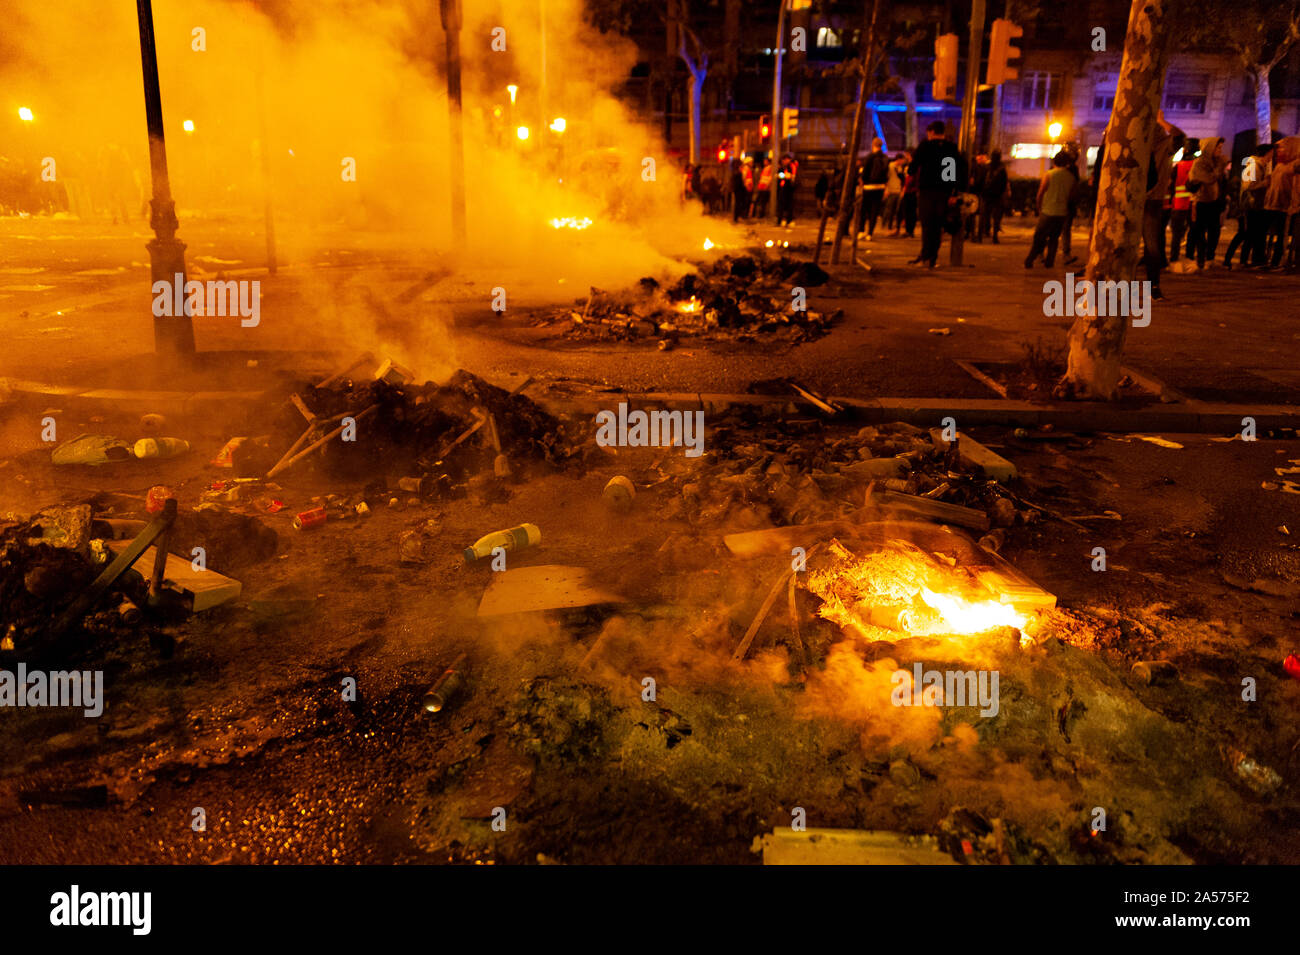 Barcelona, Spain - 16 october 2019: in the aftermath of a night of riots with catalan police the streets are left full of trash anf glass fragments, a Stock Photo